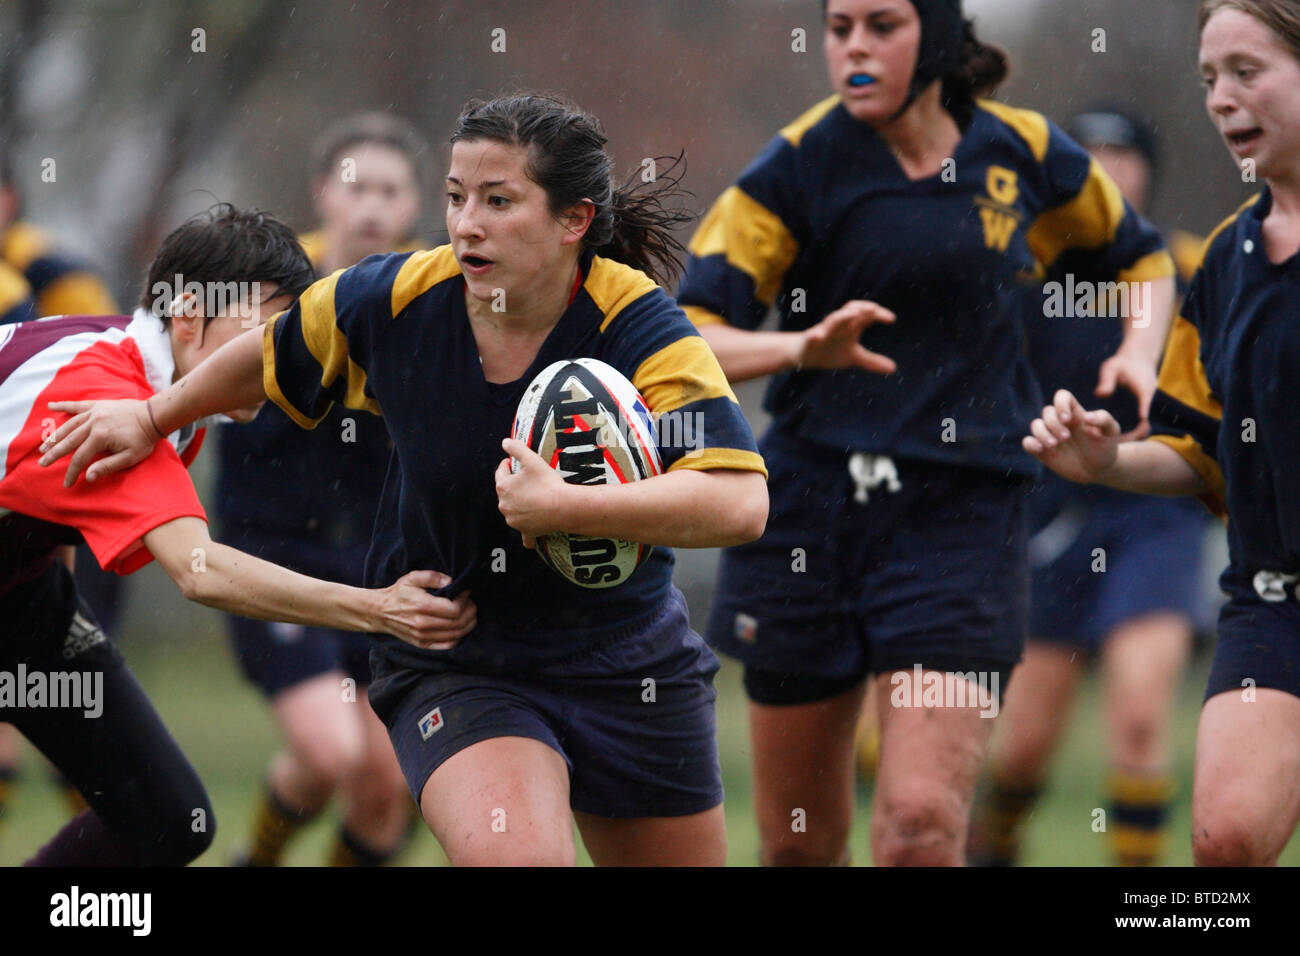 A George Washington University woman rugby player in action during a match at the annual Cherry Blossom Rugby Tournament. Stock Photo